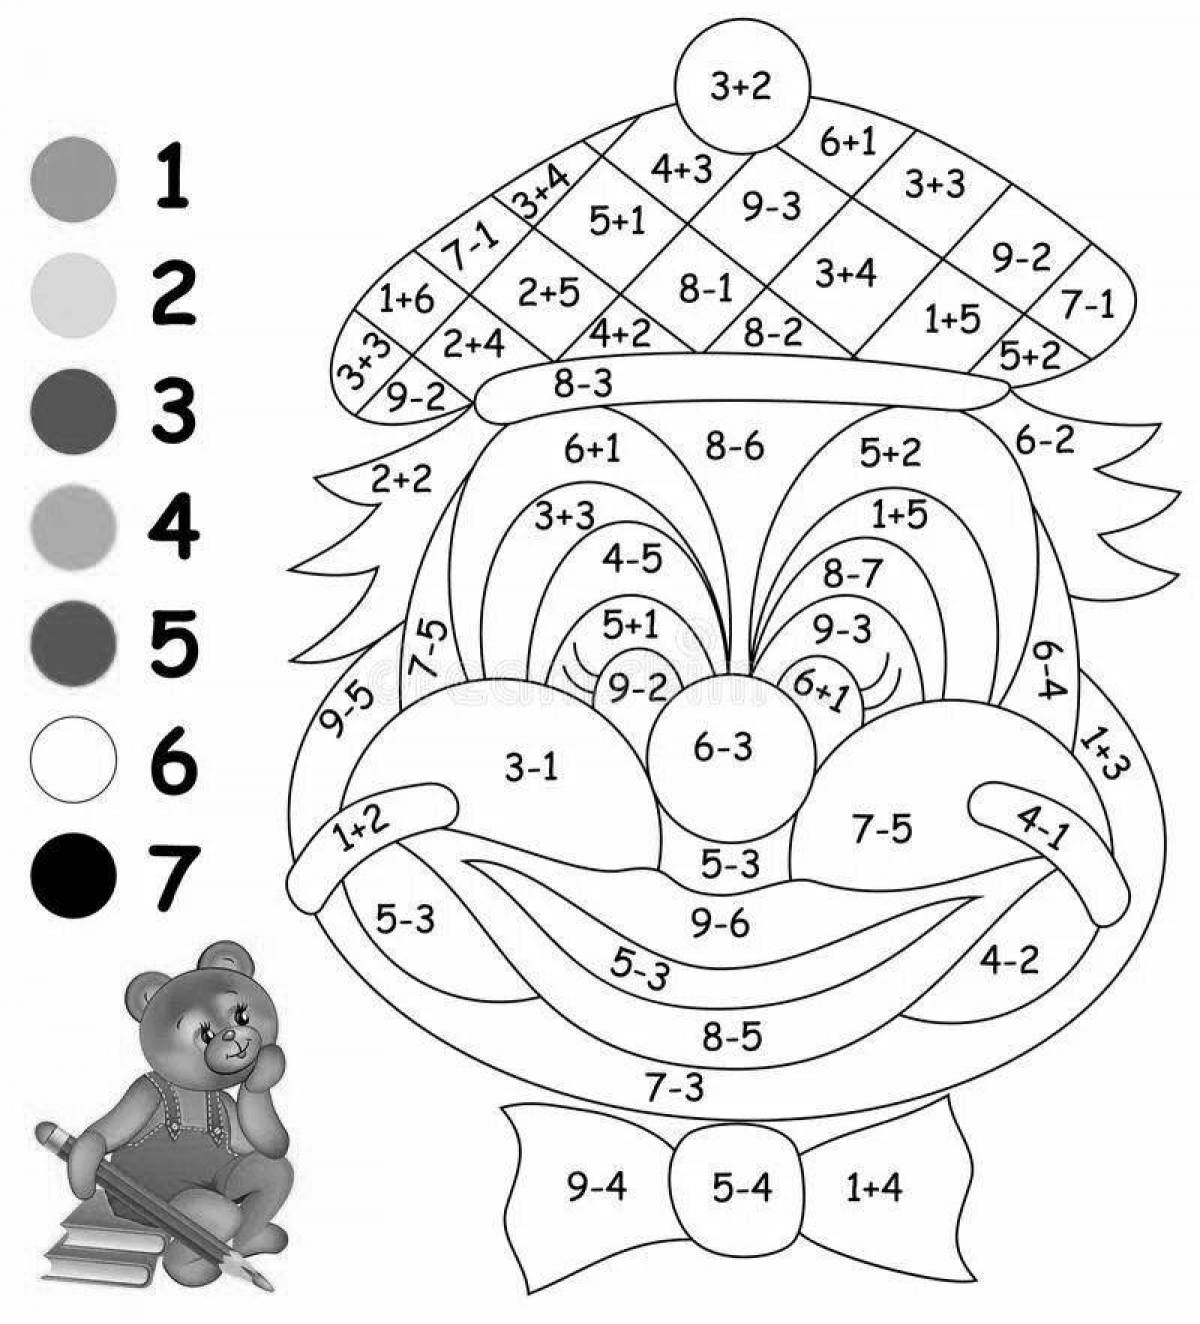 Bright coloring by numbers within 10